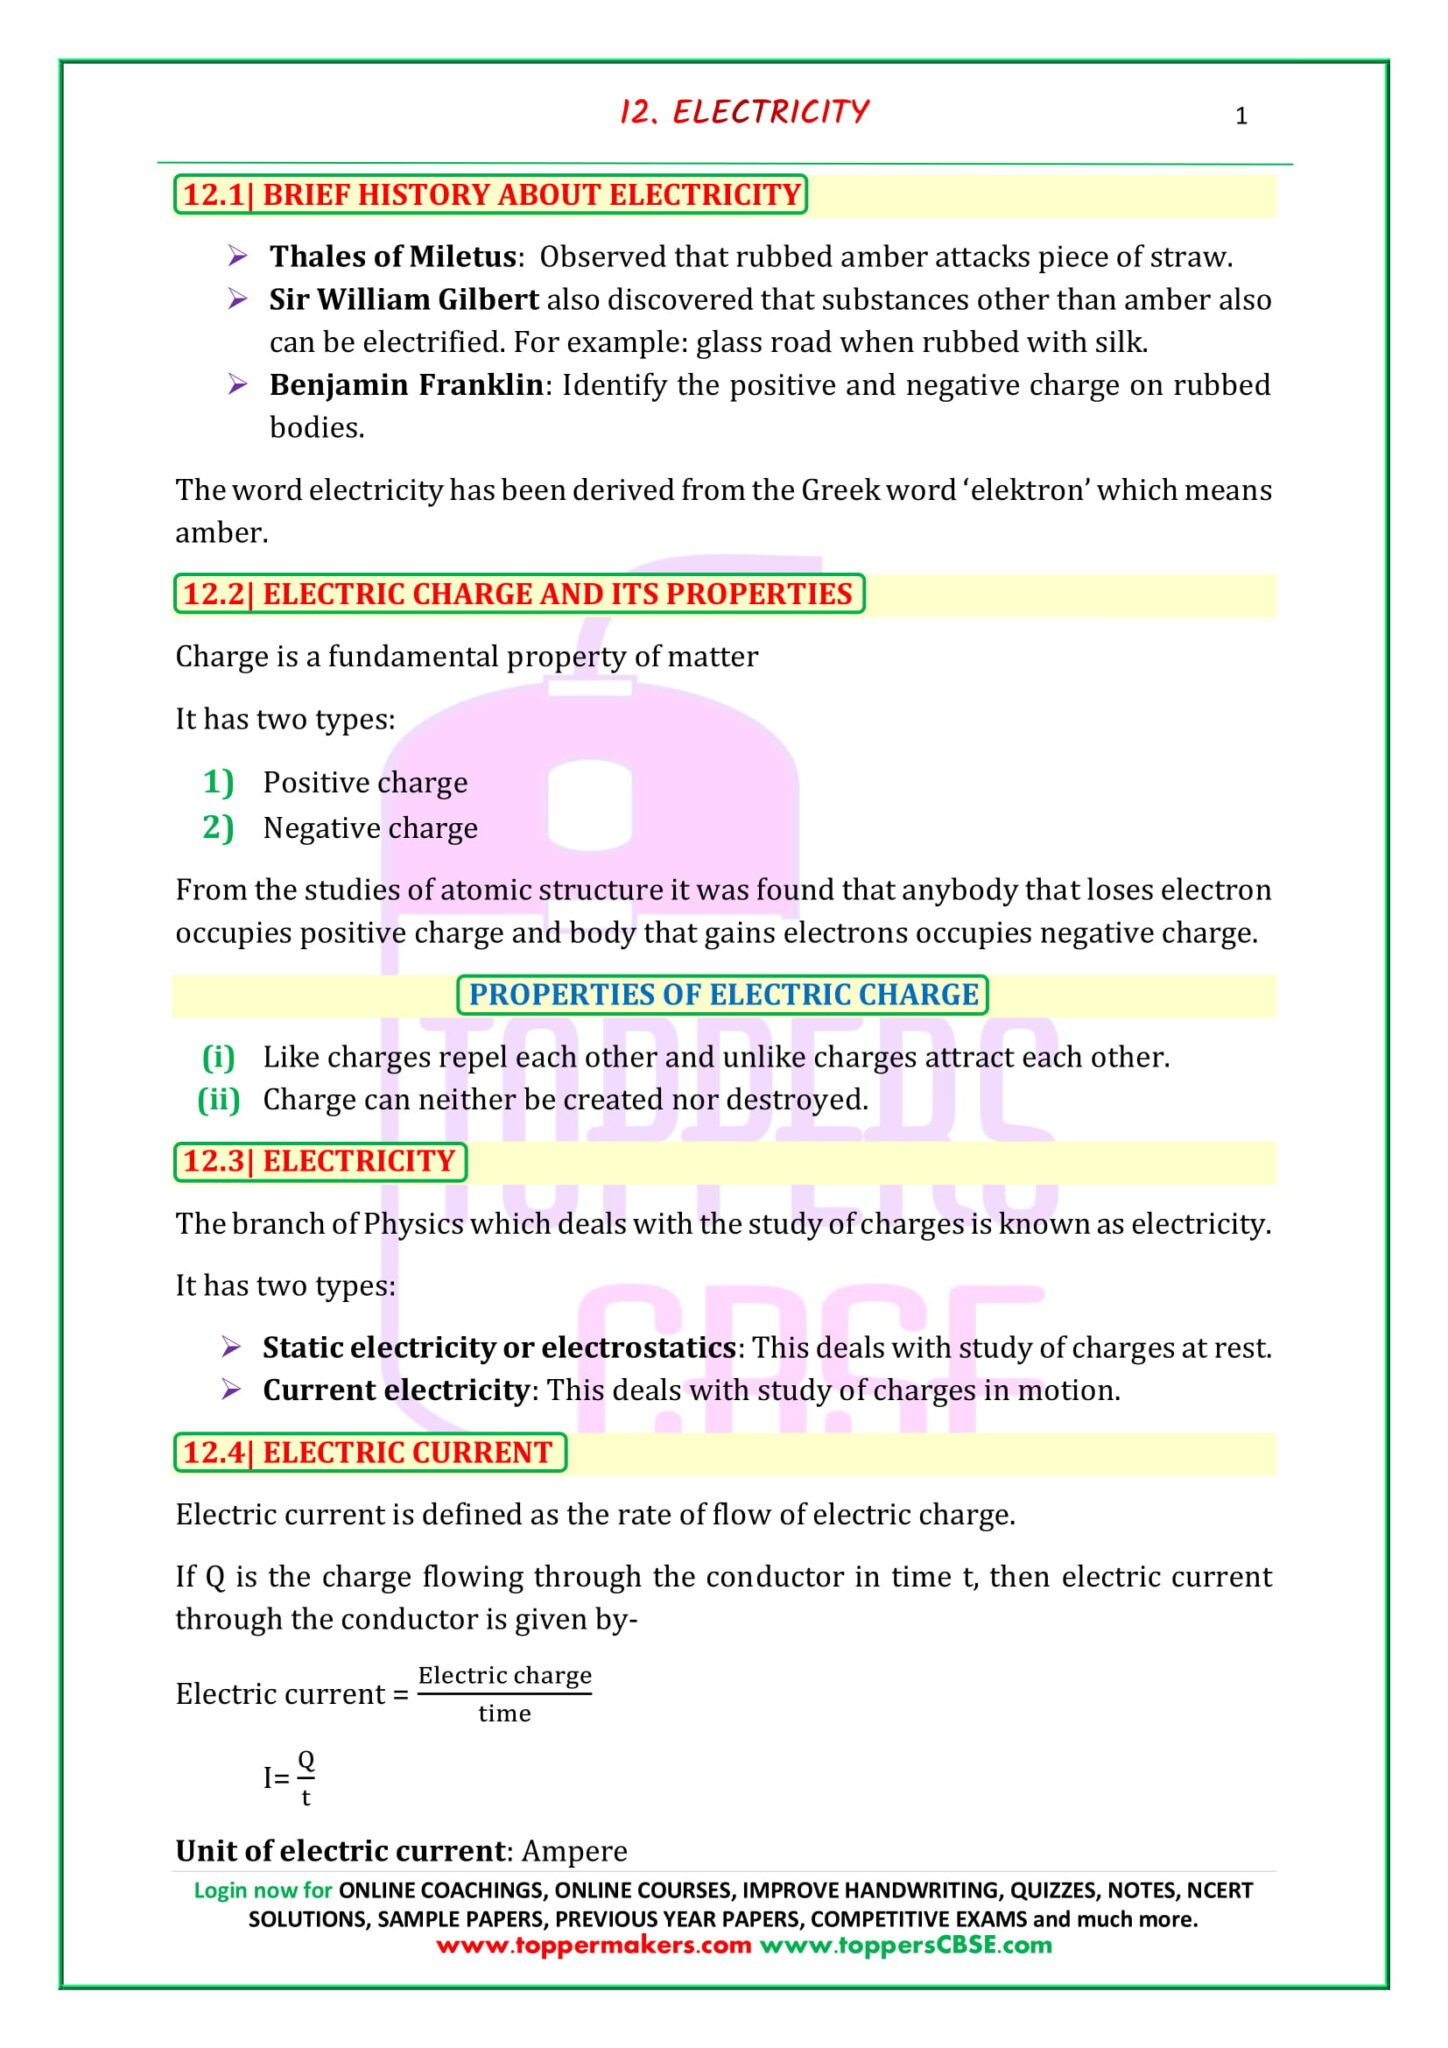 class 10 science notes of chapter 6 life processes